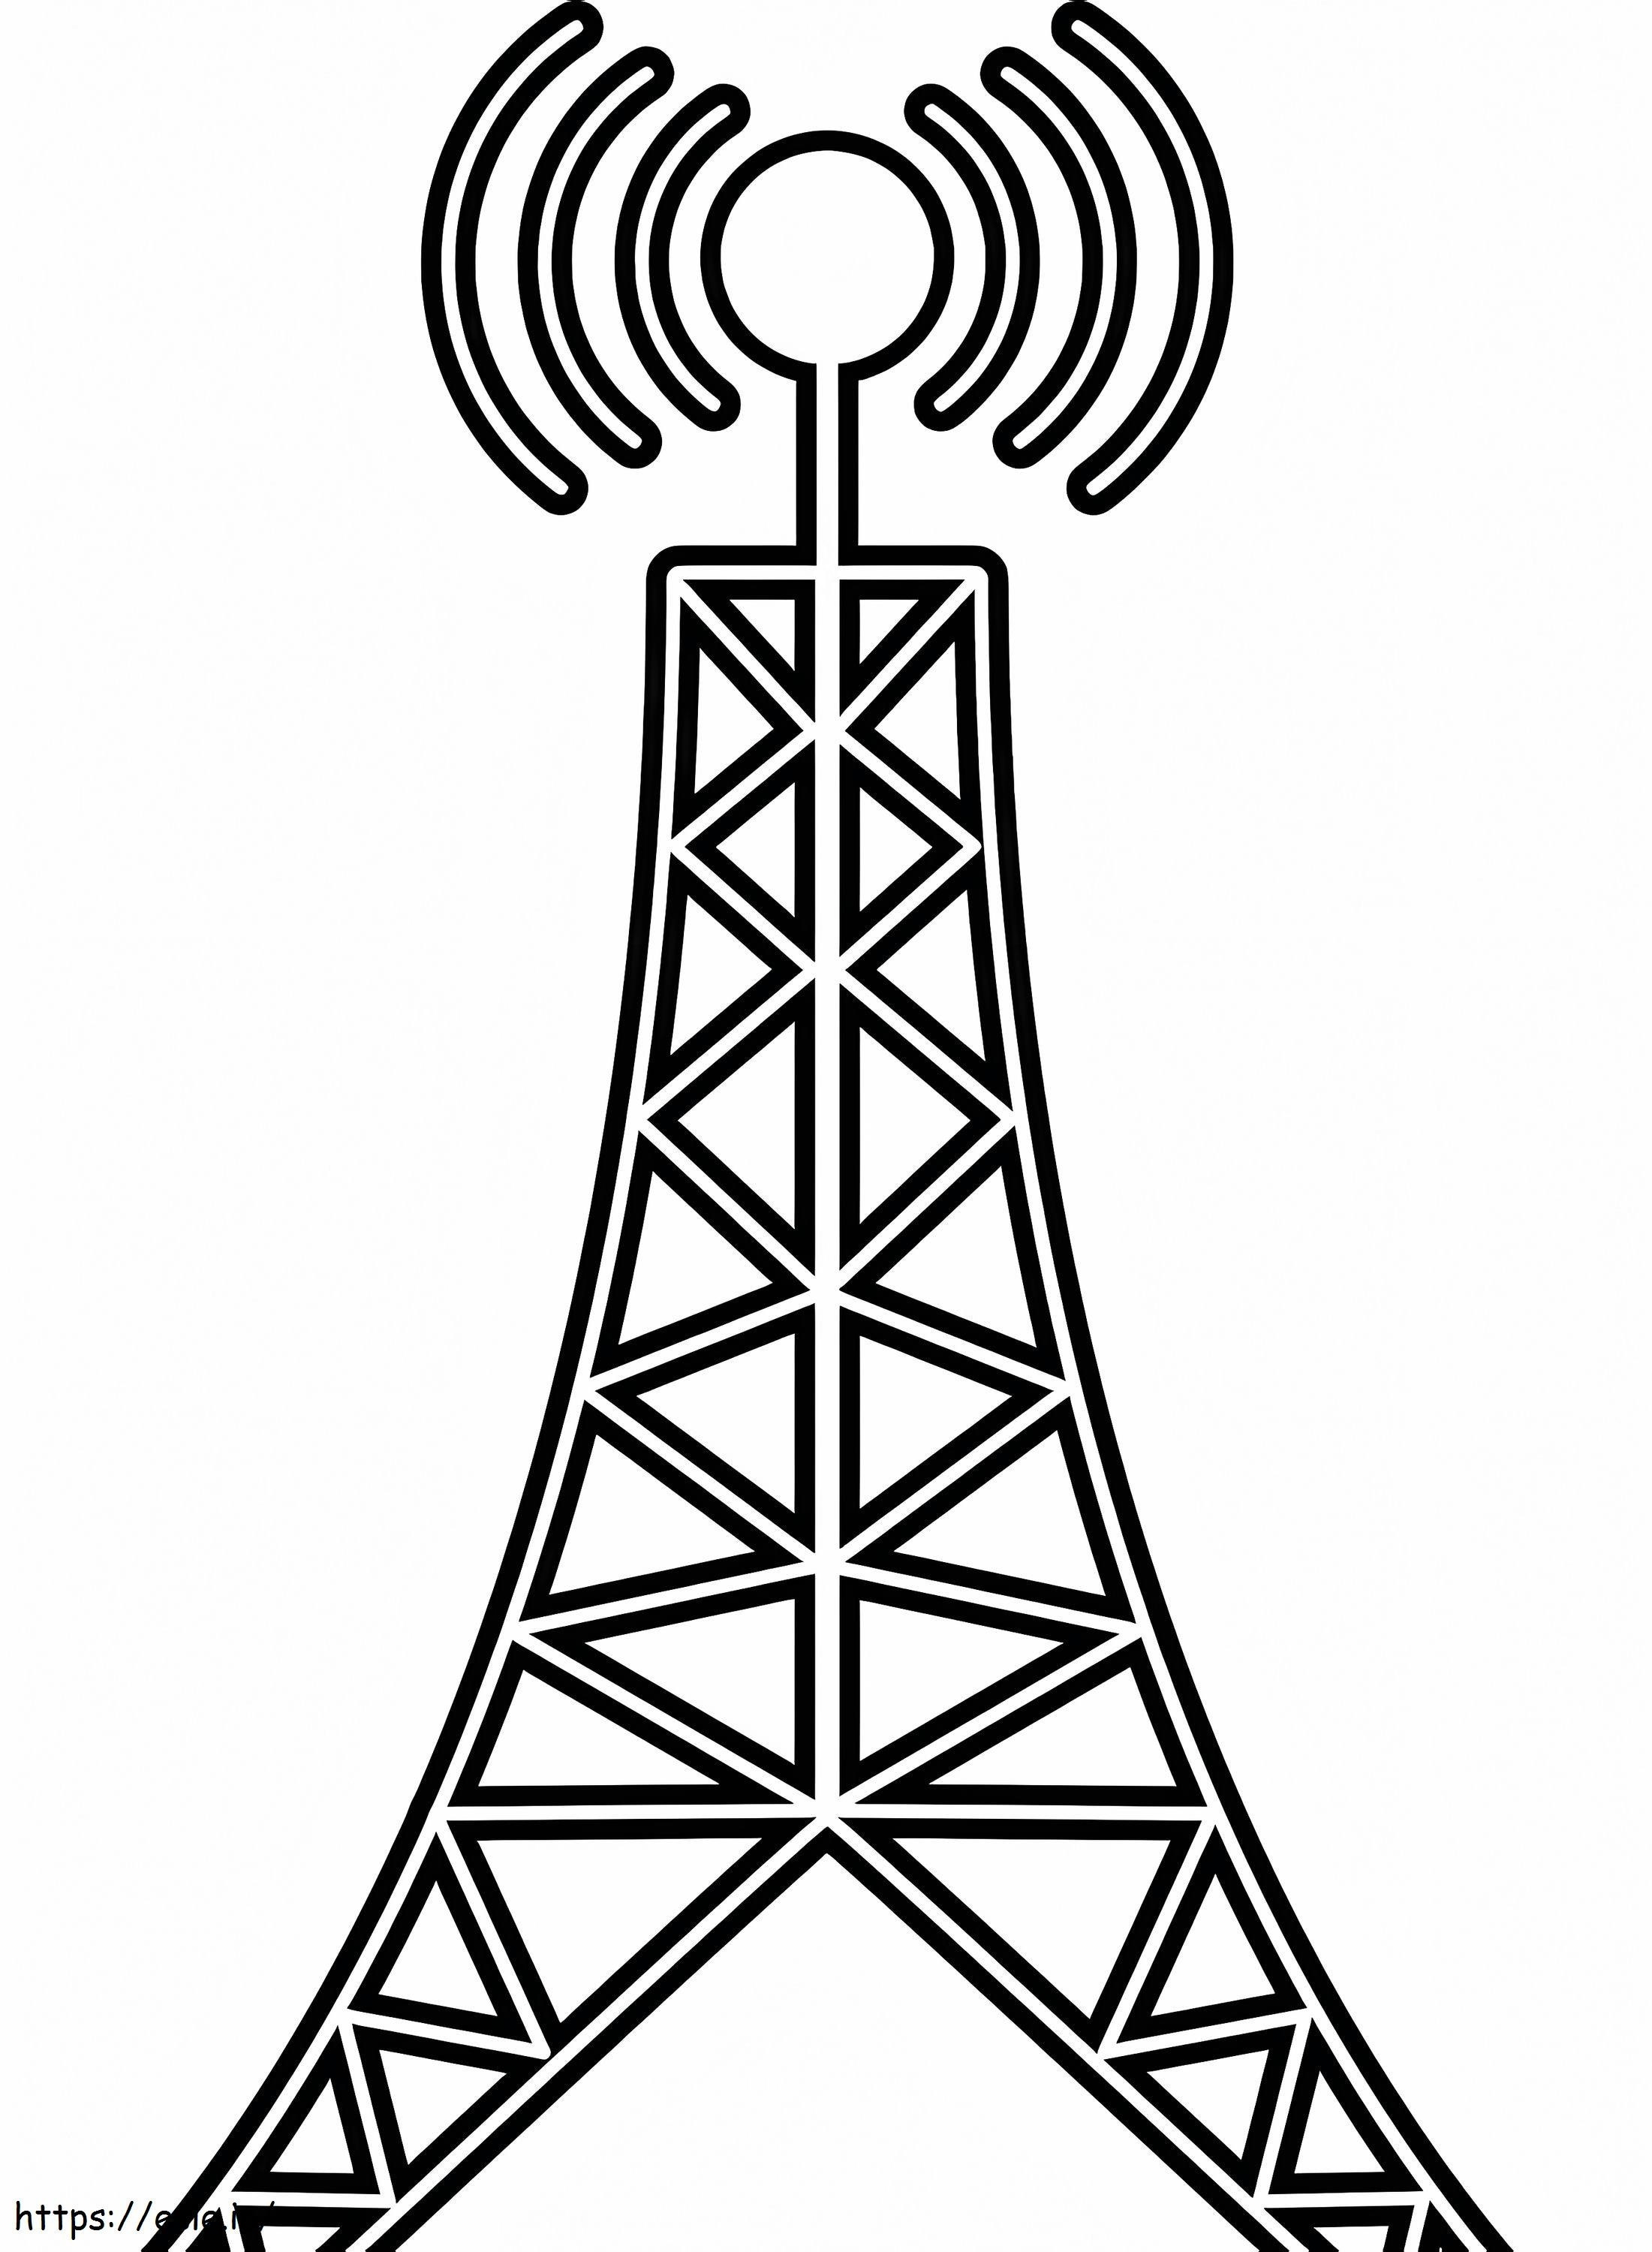 Antenna Tower coloring page